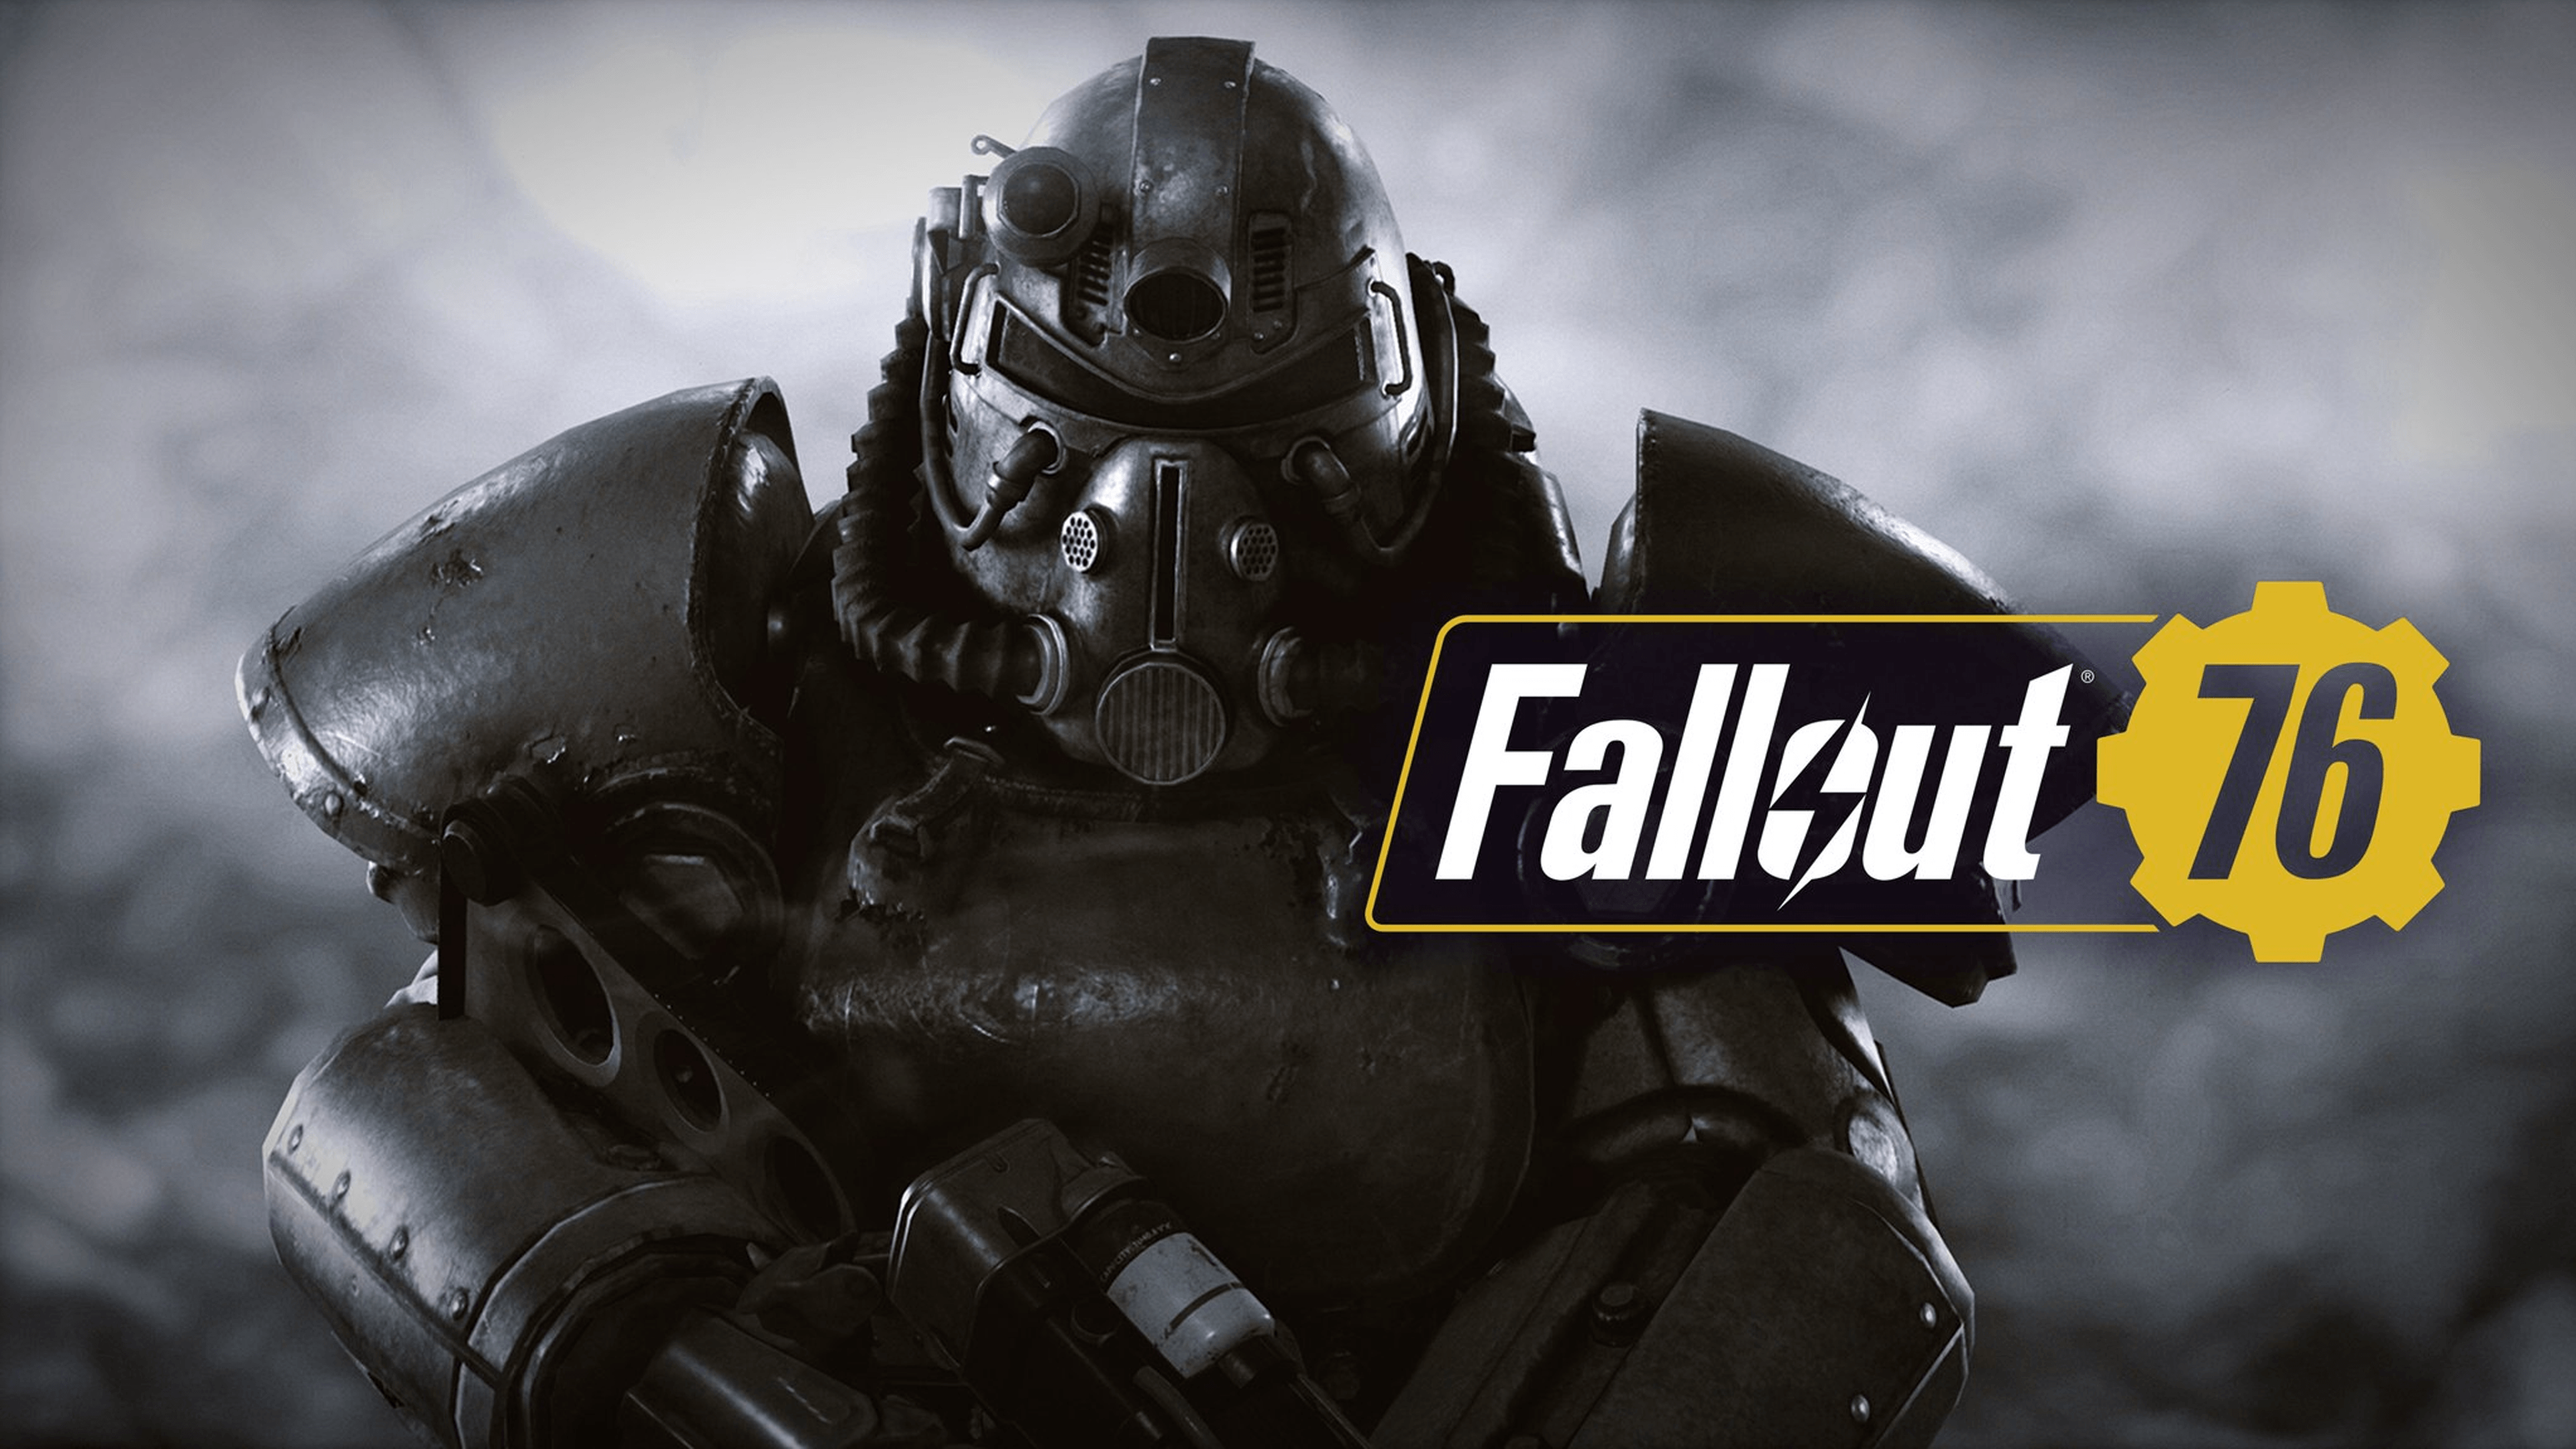 20 Fallout 76 HD Wallpapers and Backgrounds